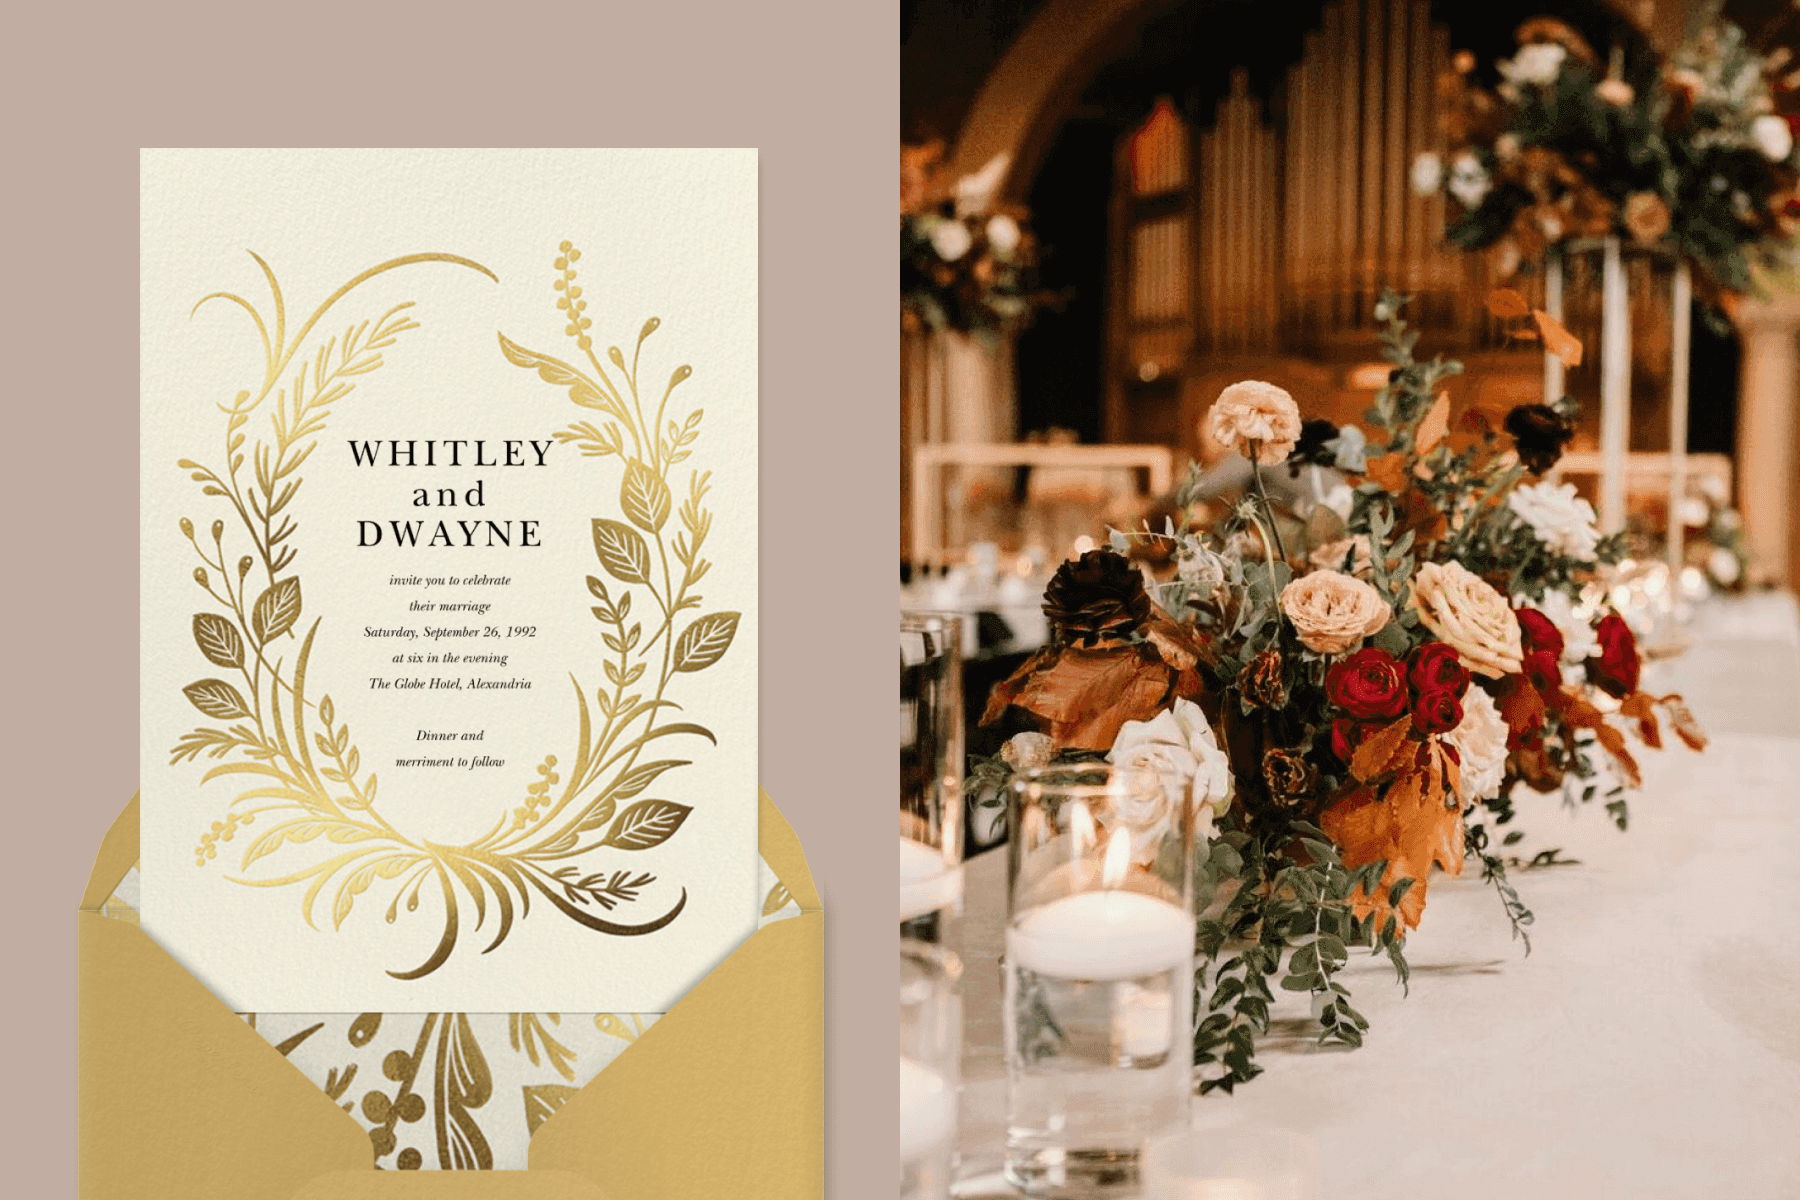 Left: A wedding invitation with a gold foil wreath of leaves and grasses. Right: An autumnal floral table centerpiece.